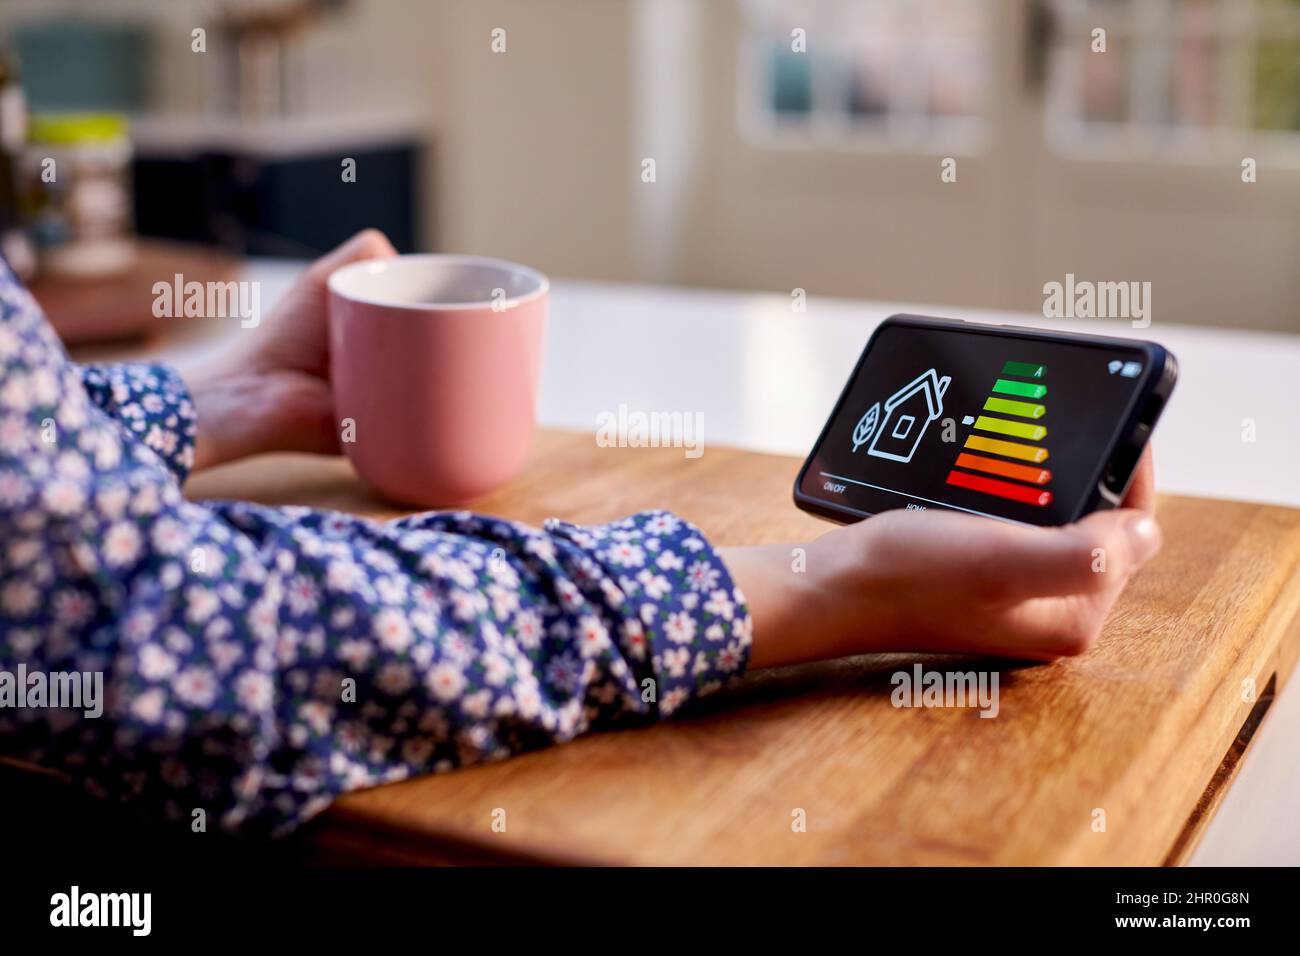 Close Up Of Woman Holding Smart Energy Meter In Kitchen Measuring Energy Efficiency Stock Photo